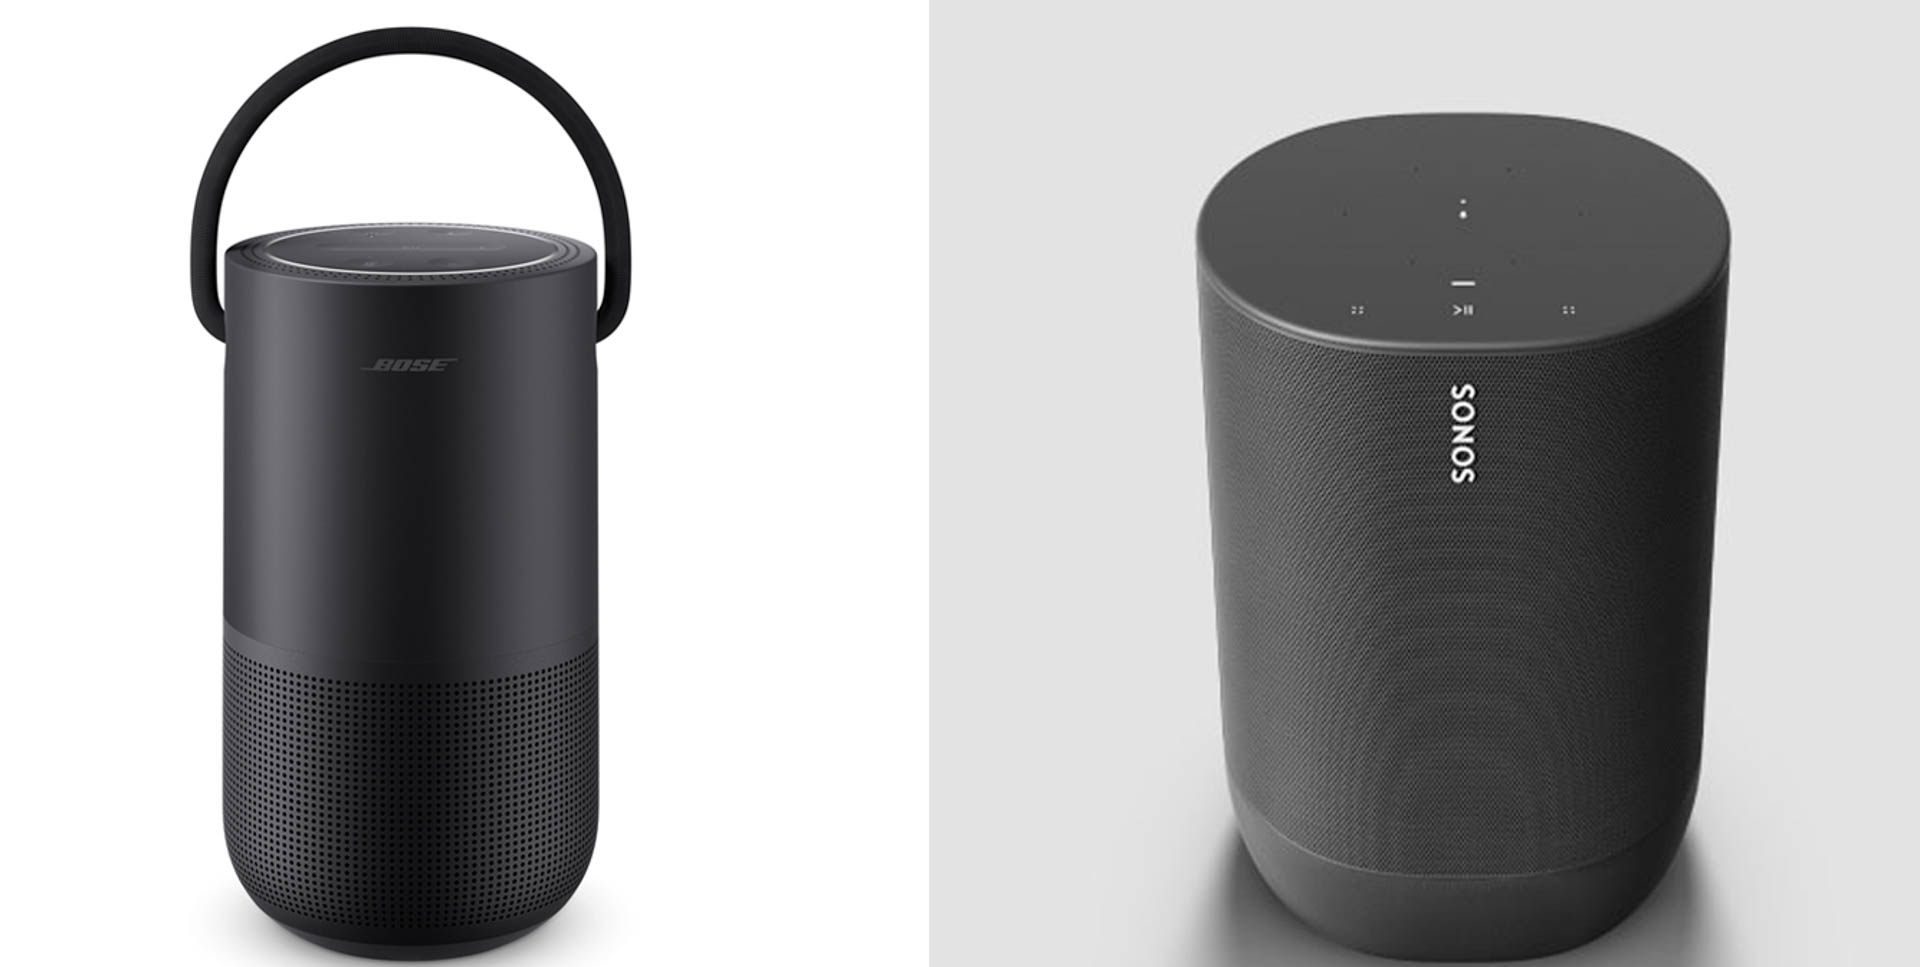 The Bose Portable Home Speaker (left) and Sonos Move (right). Images: Bose and Sonos.